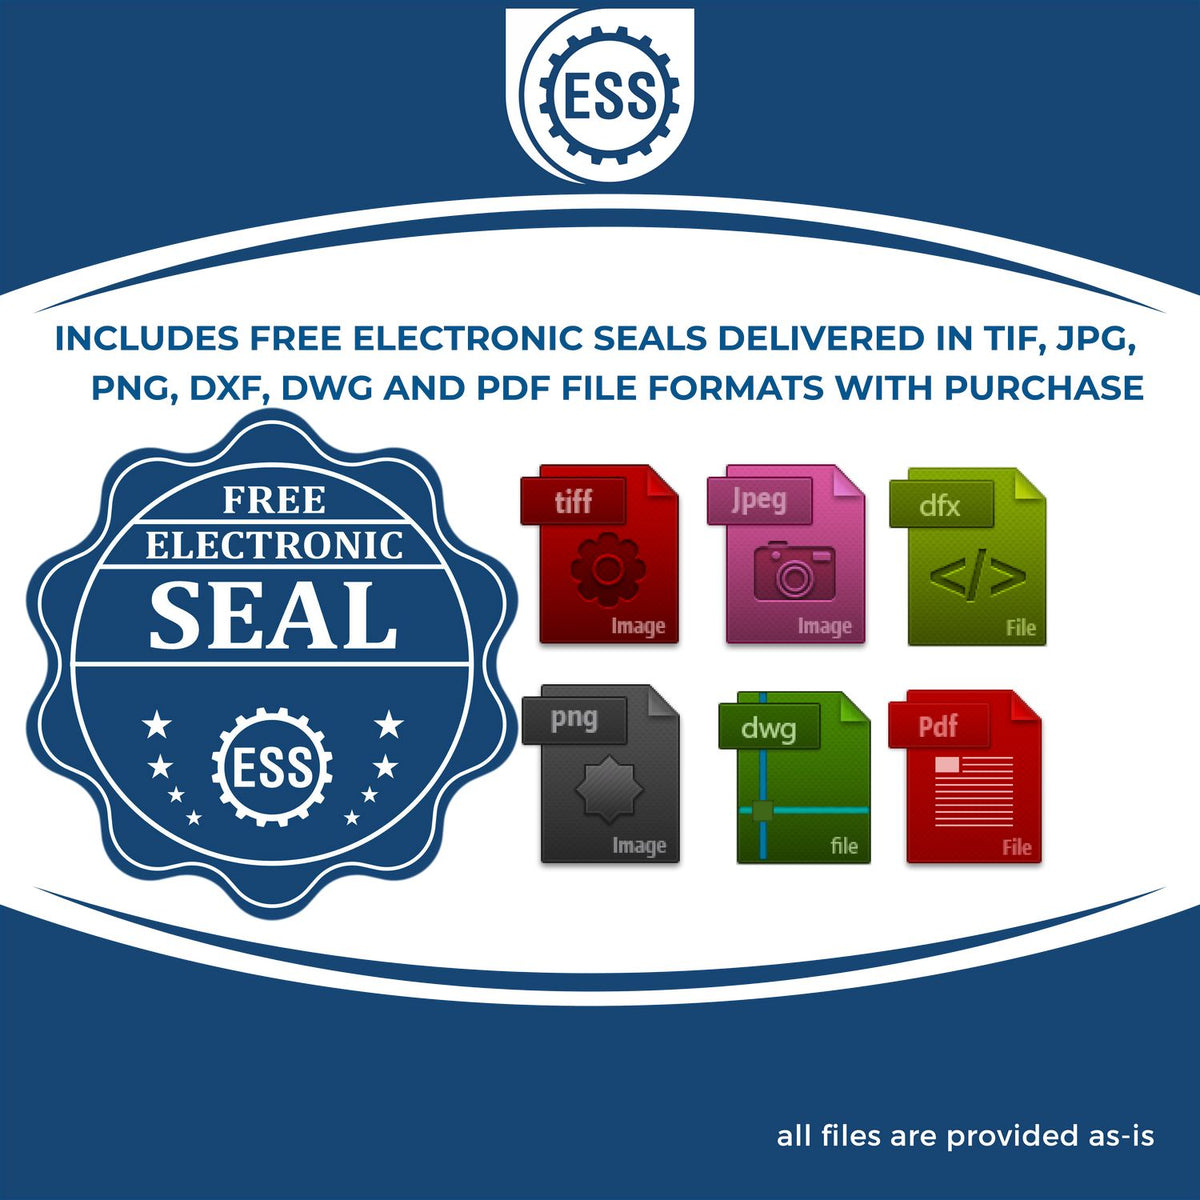 An infographic for the free electronic seal for the Hybrid New York Geologist Seal illustrating the different file type icons such as DXF, DWG, TIF, JPG and PNG.